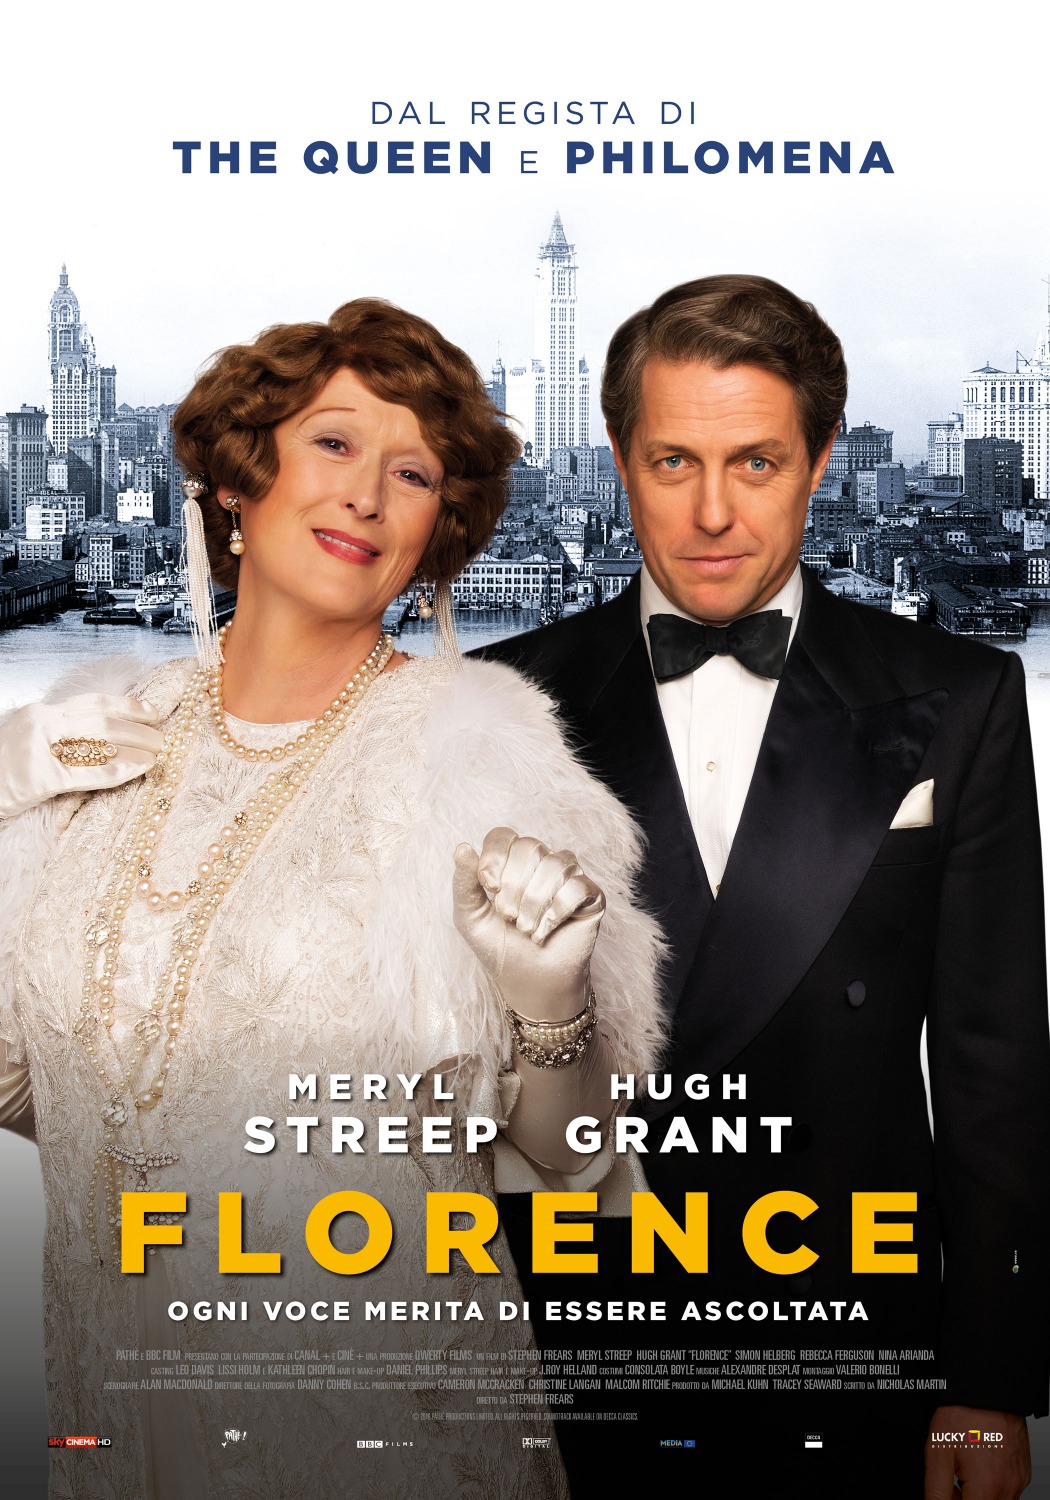 Extra Large Movie Poster Image for Florence Foster Jenkins (#6 of 6)